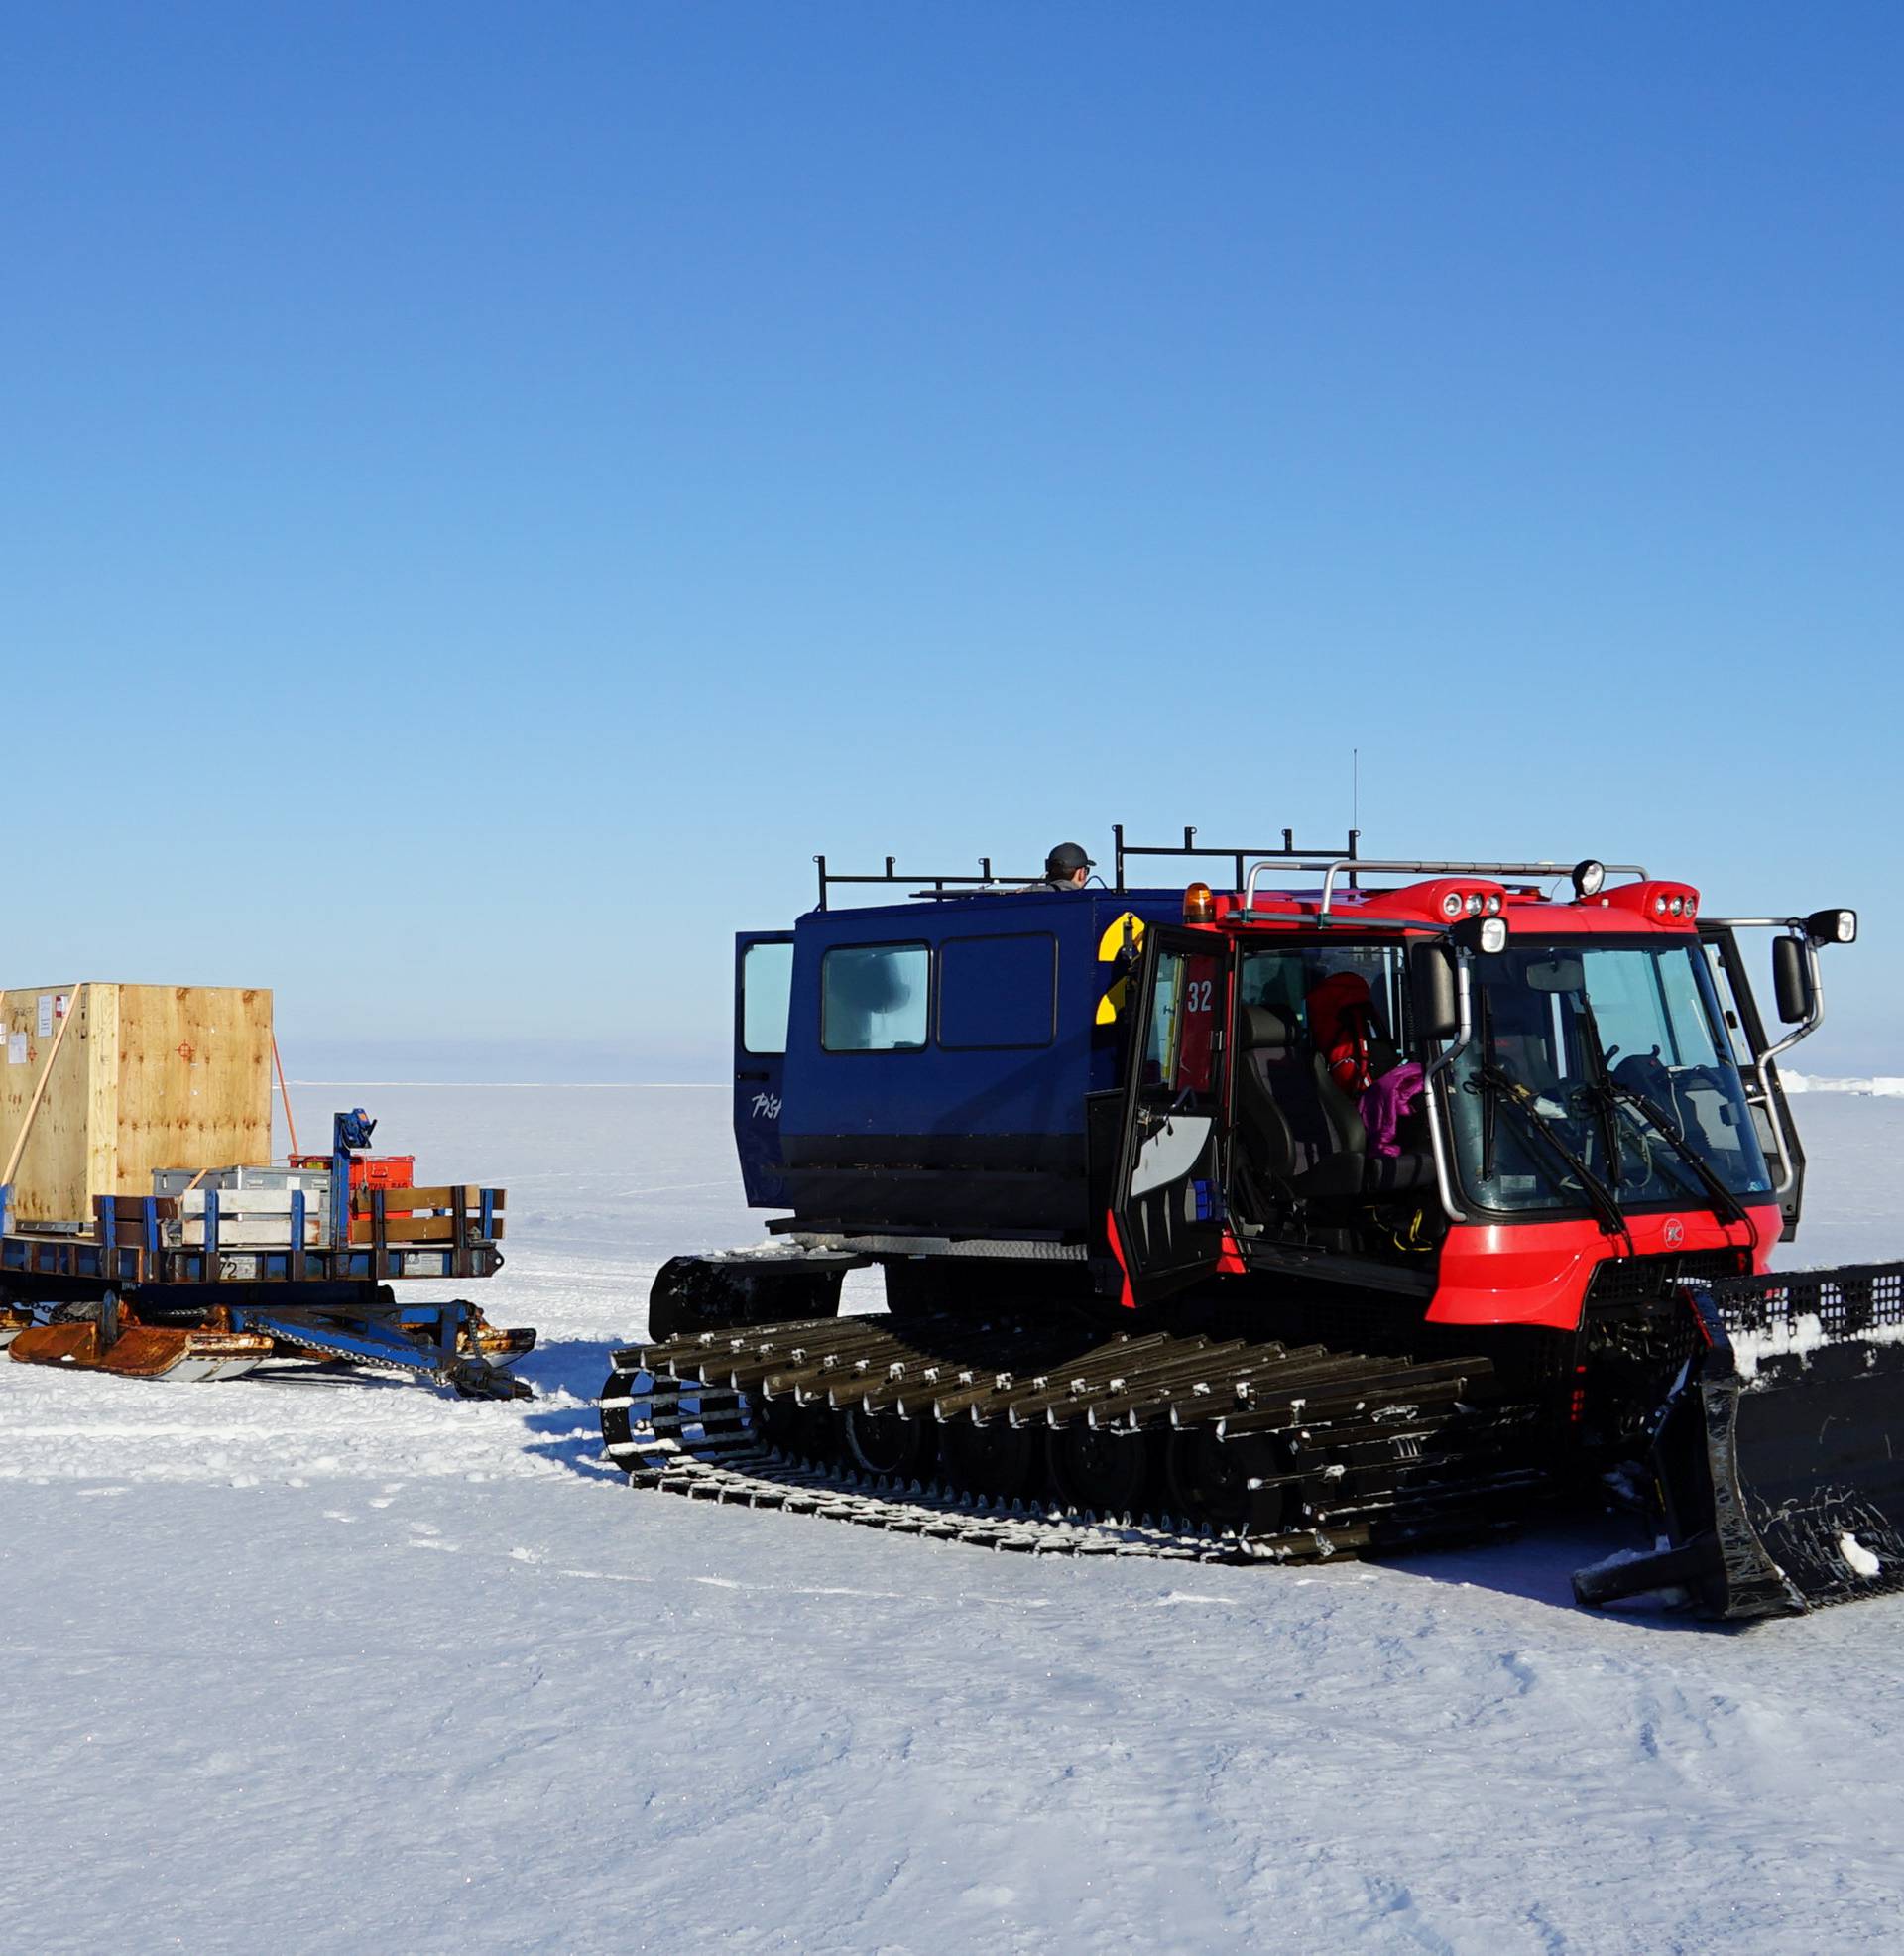 The EDEN ISS greenhouse is transported to its destination in the Antarctic